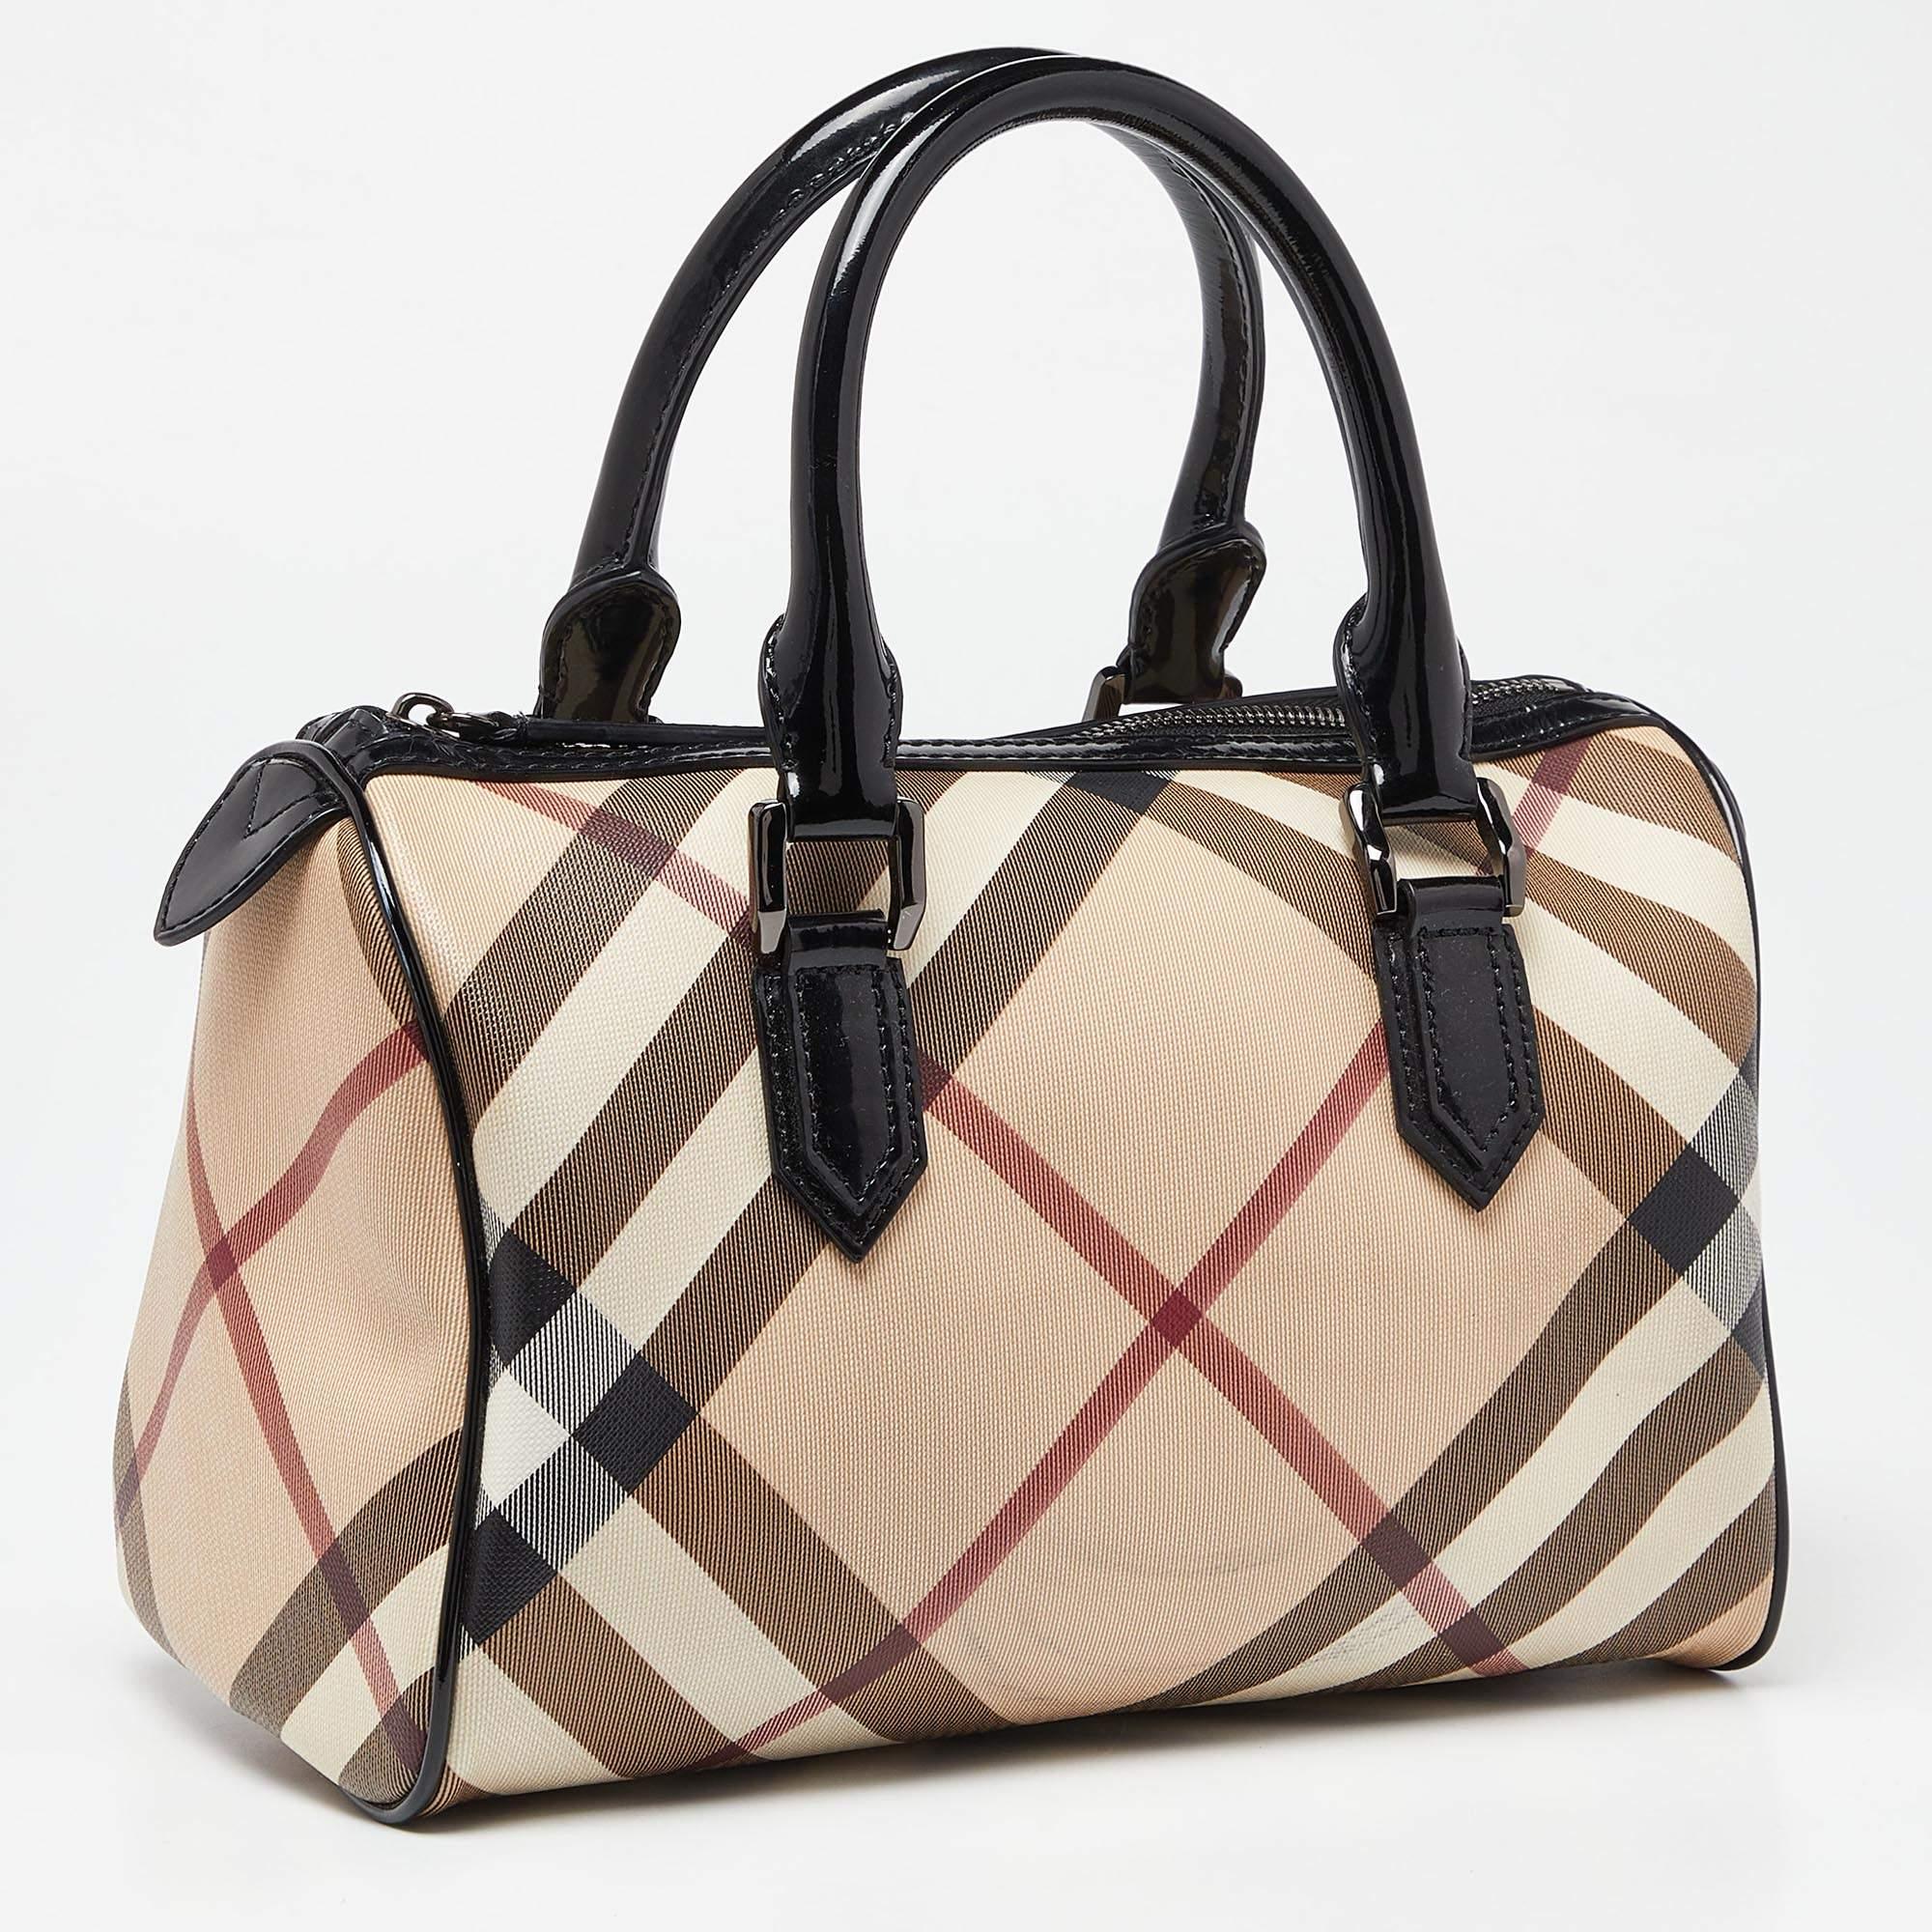 Spacious and classy, this Chester Boston bag is from Burberry. It has been crafted from their signature Nova check PVC and accented with leather trims and black-tone hardware. It is equipped with a well-sized fabric interior and two handles.

